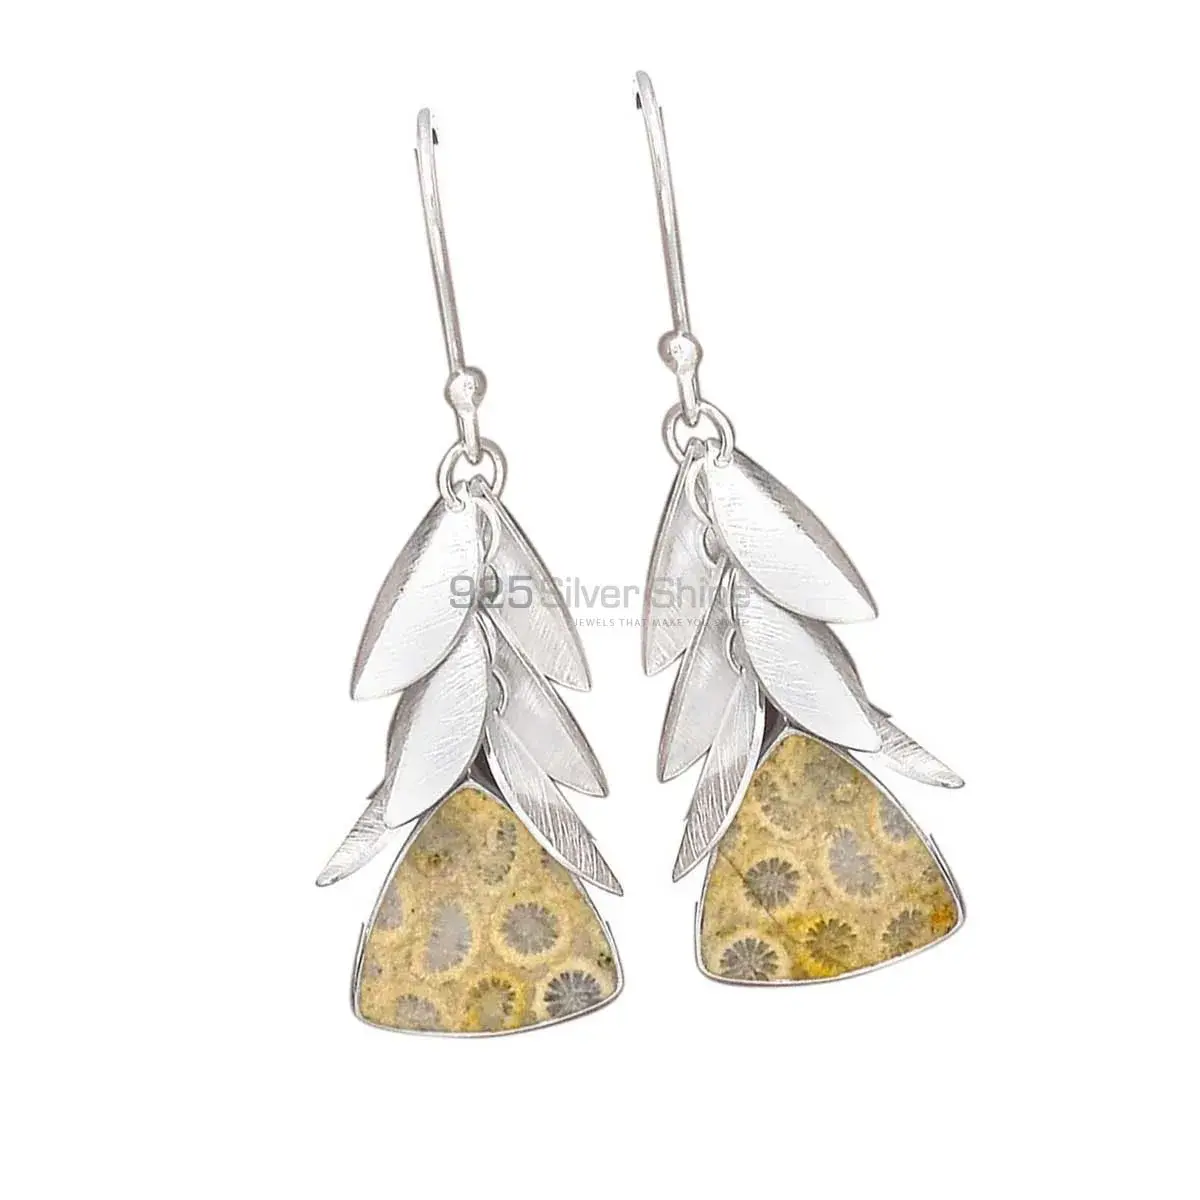 Best Design 925 Sterling Silver Handmade Earrings Manufacturer In Fossil Coral Gemstone Jewelry 925SE3023